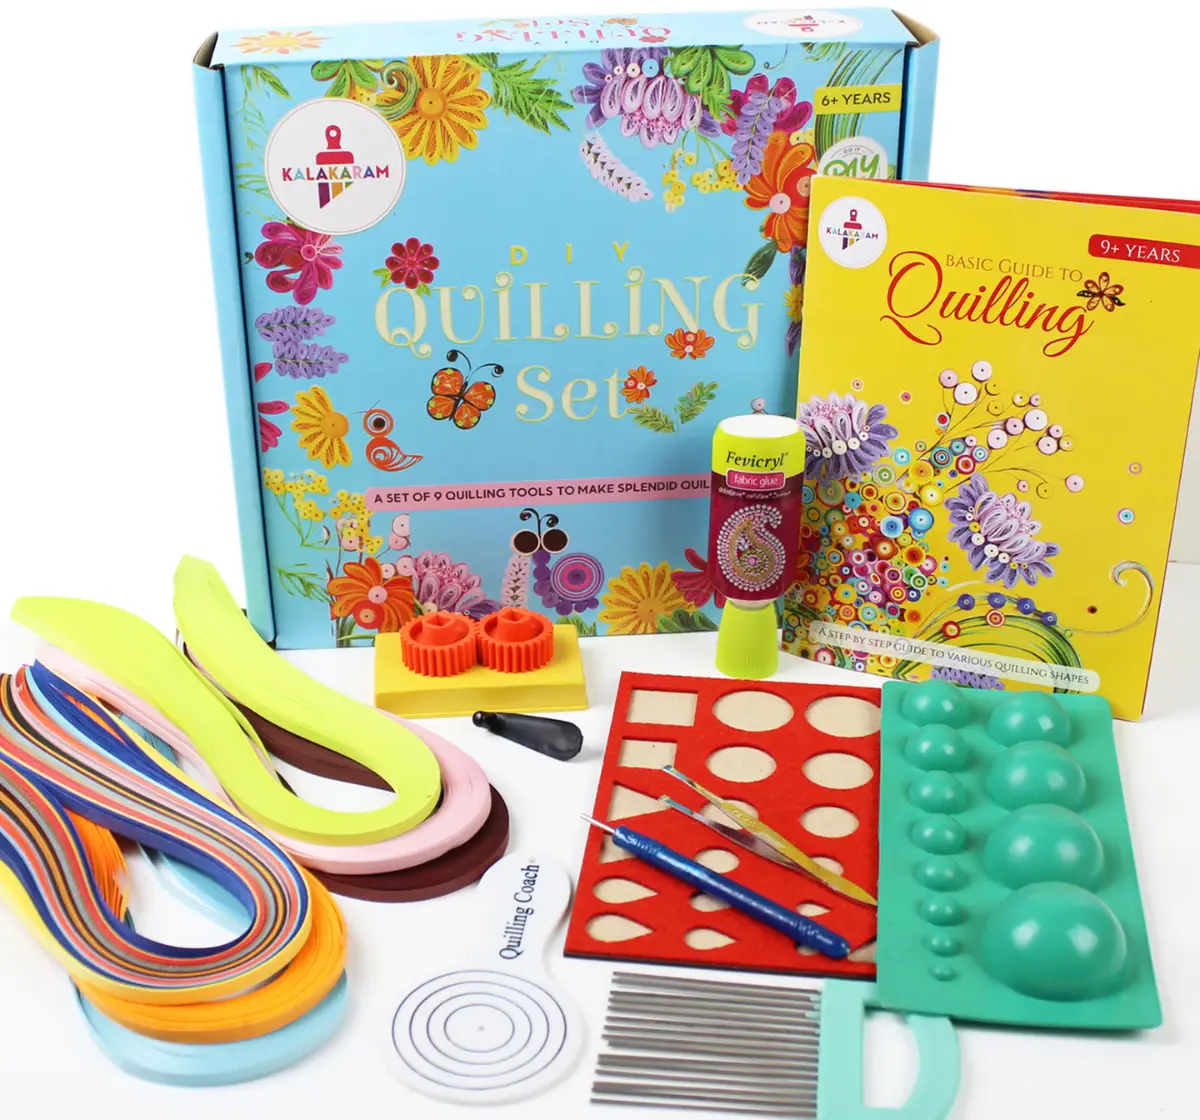 Kalakaram Quilling Craft Kit, with Paper Strips and Tools Art and Craft Kit, Paper Craft Kit for Kids, 6Y+, Multicolour